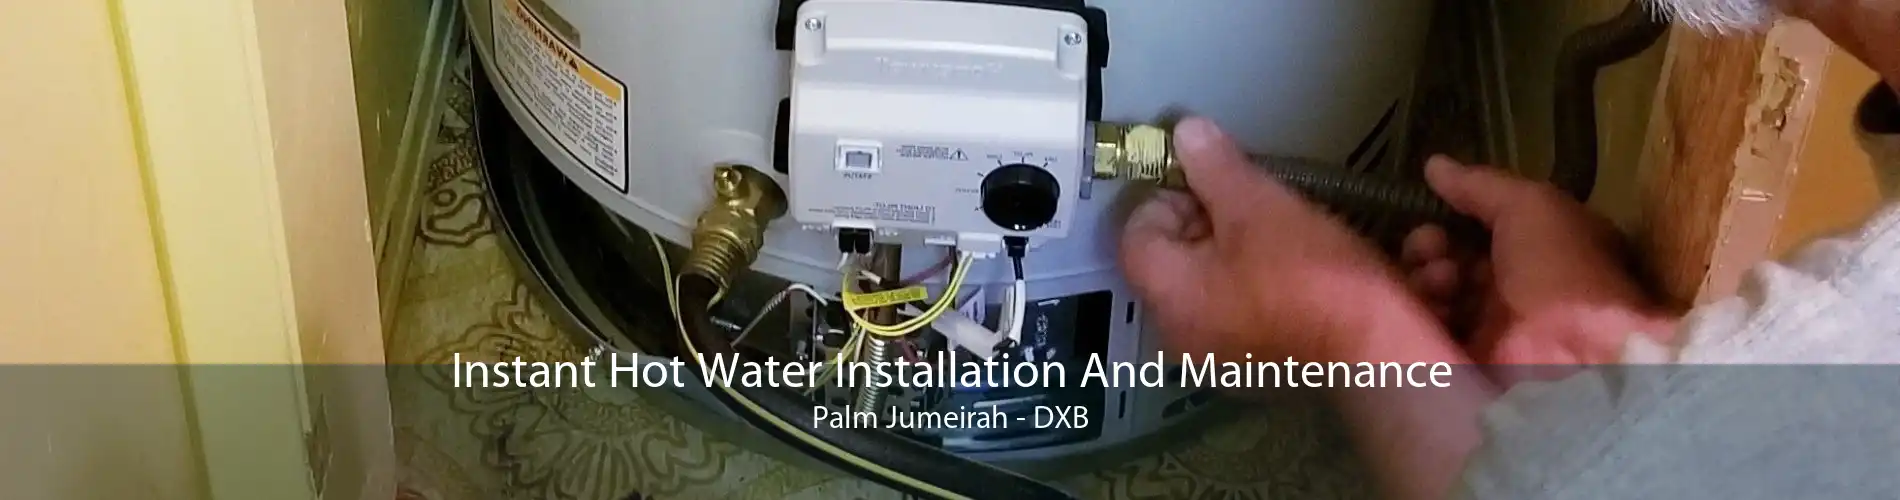 Instant Hot Water Installation And Maintenance Palm Jumeirah - DXB